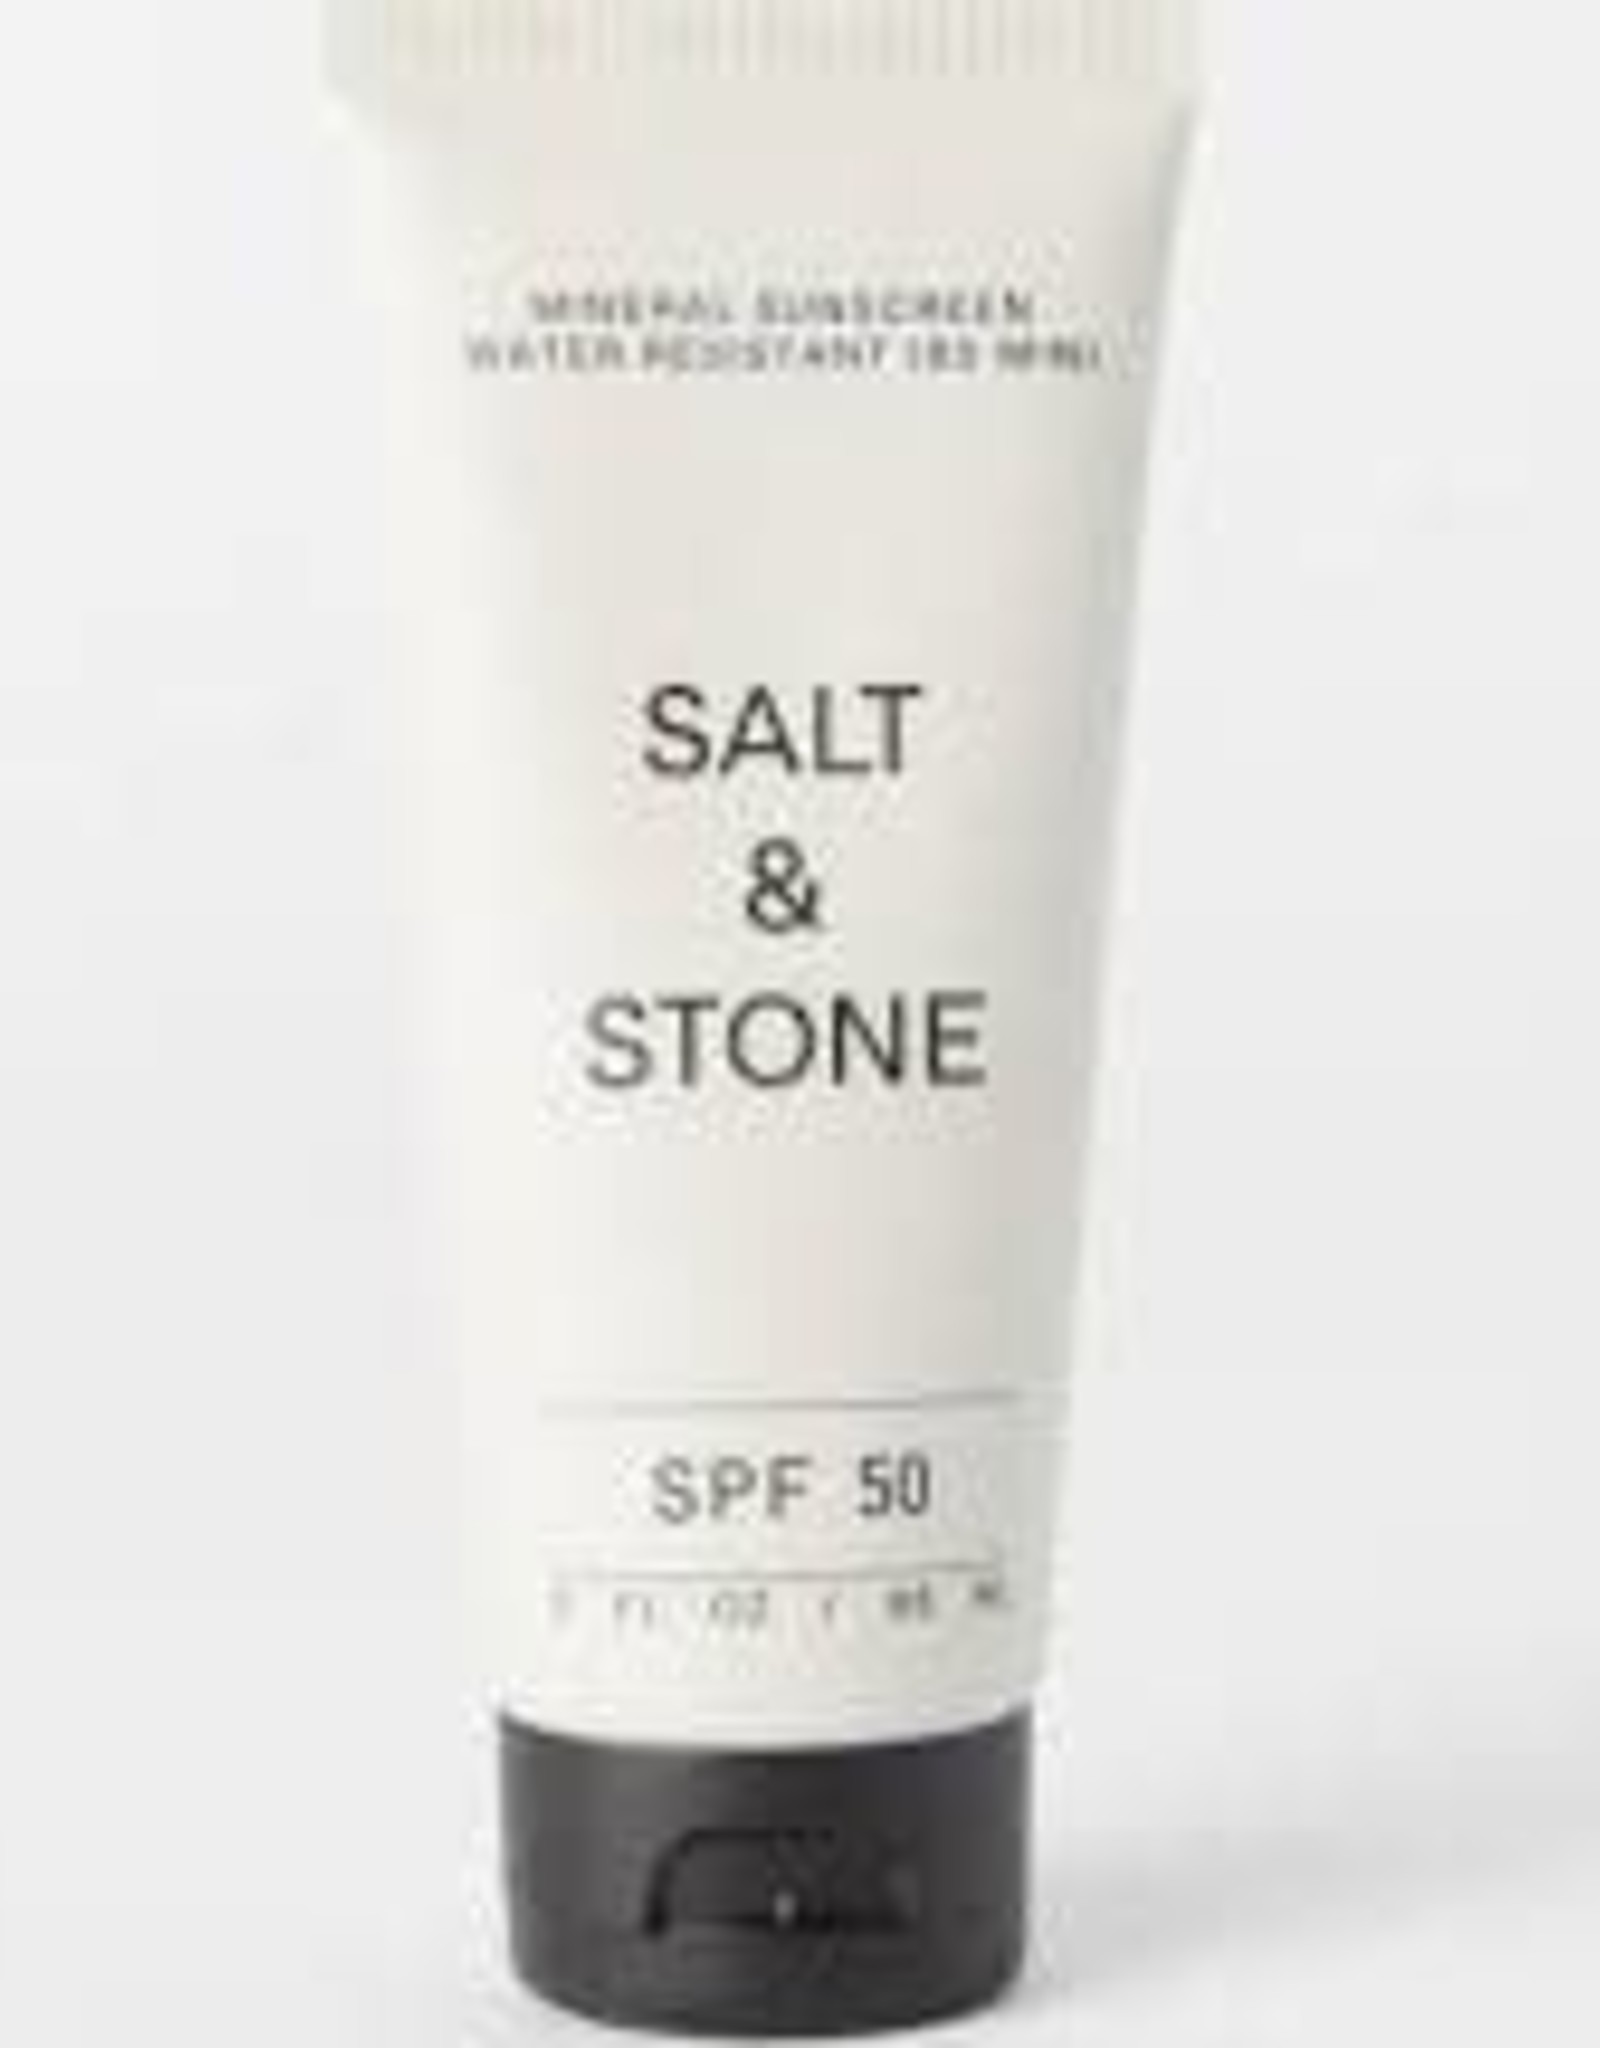 salt and stone Salt and stone spf 50 lotion